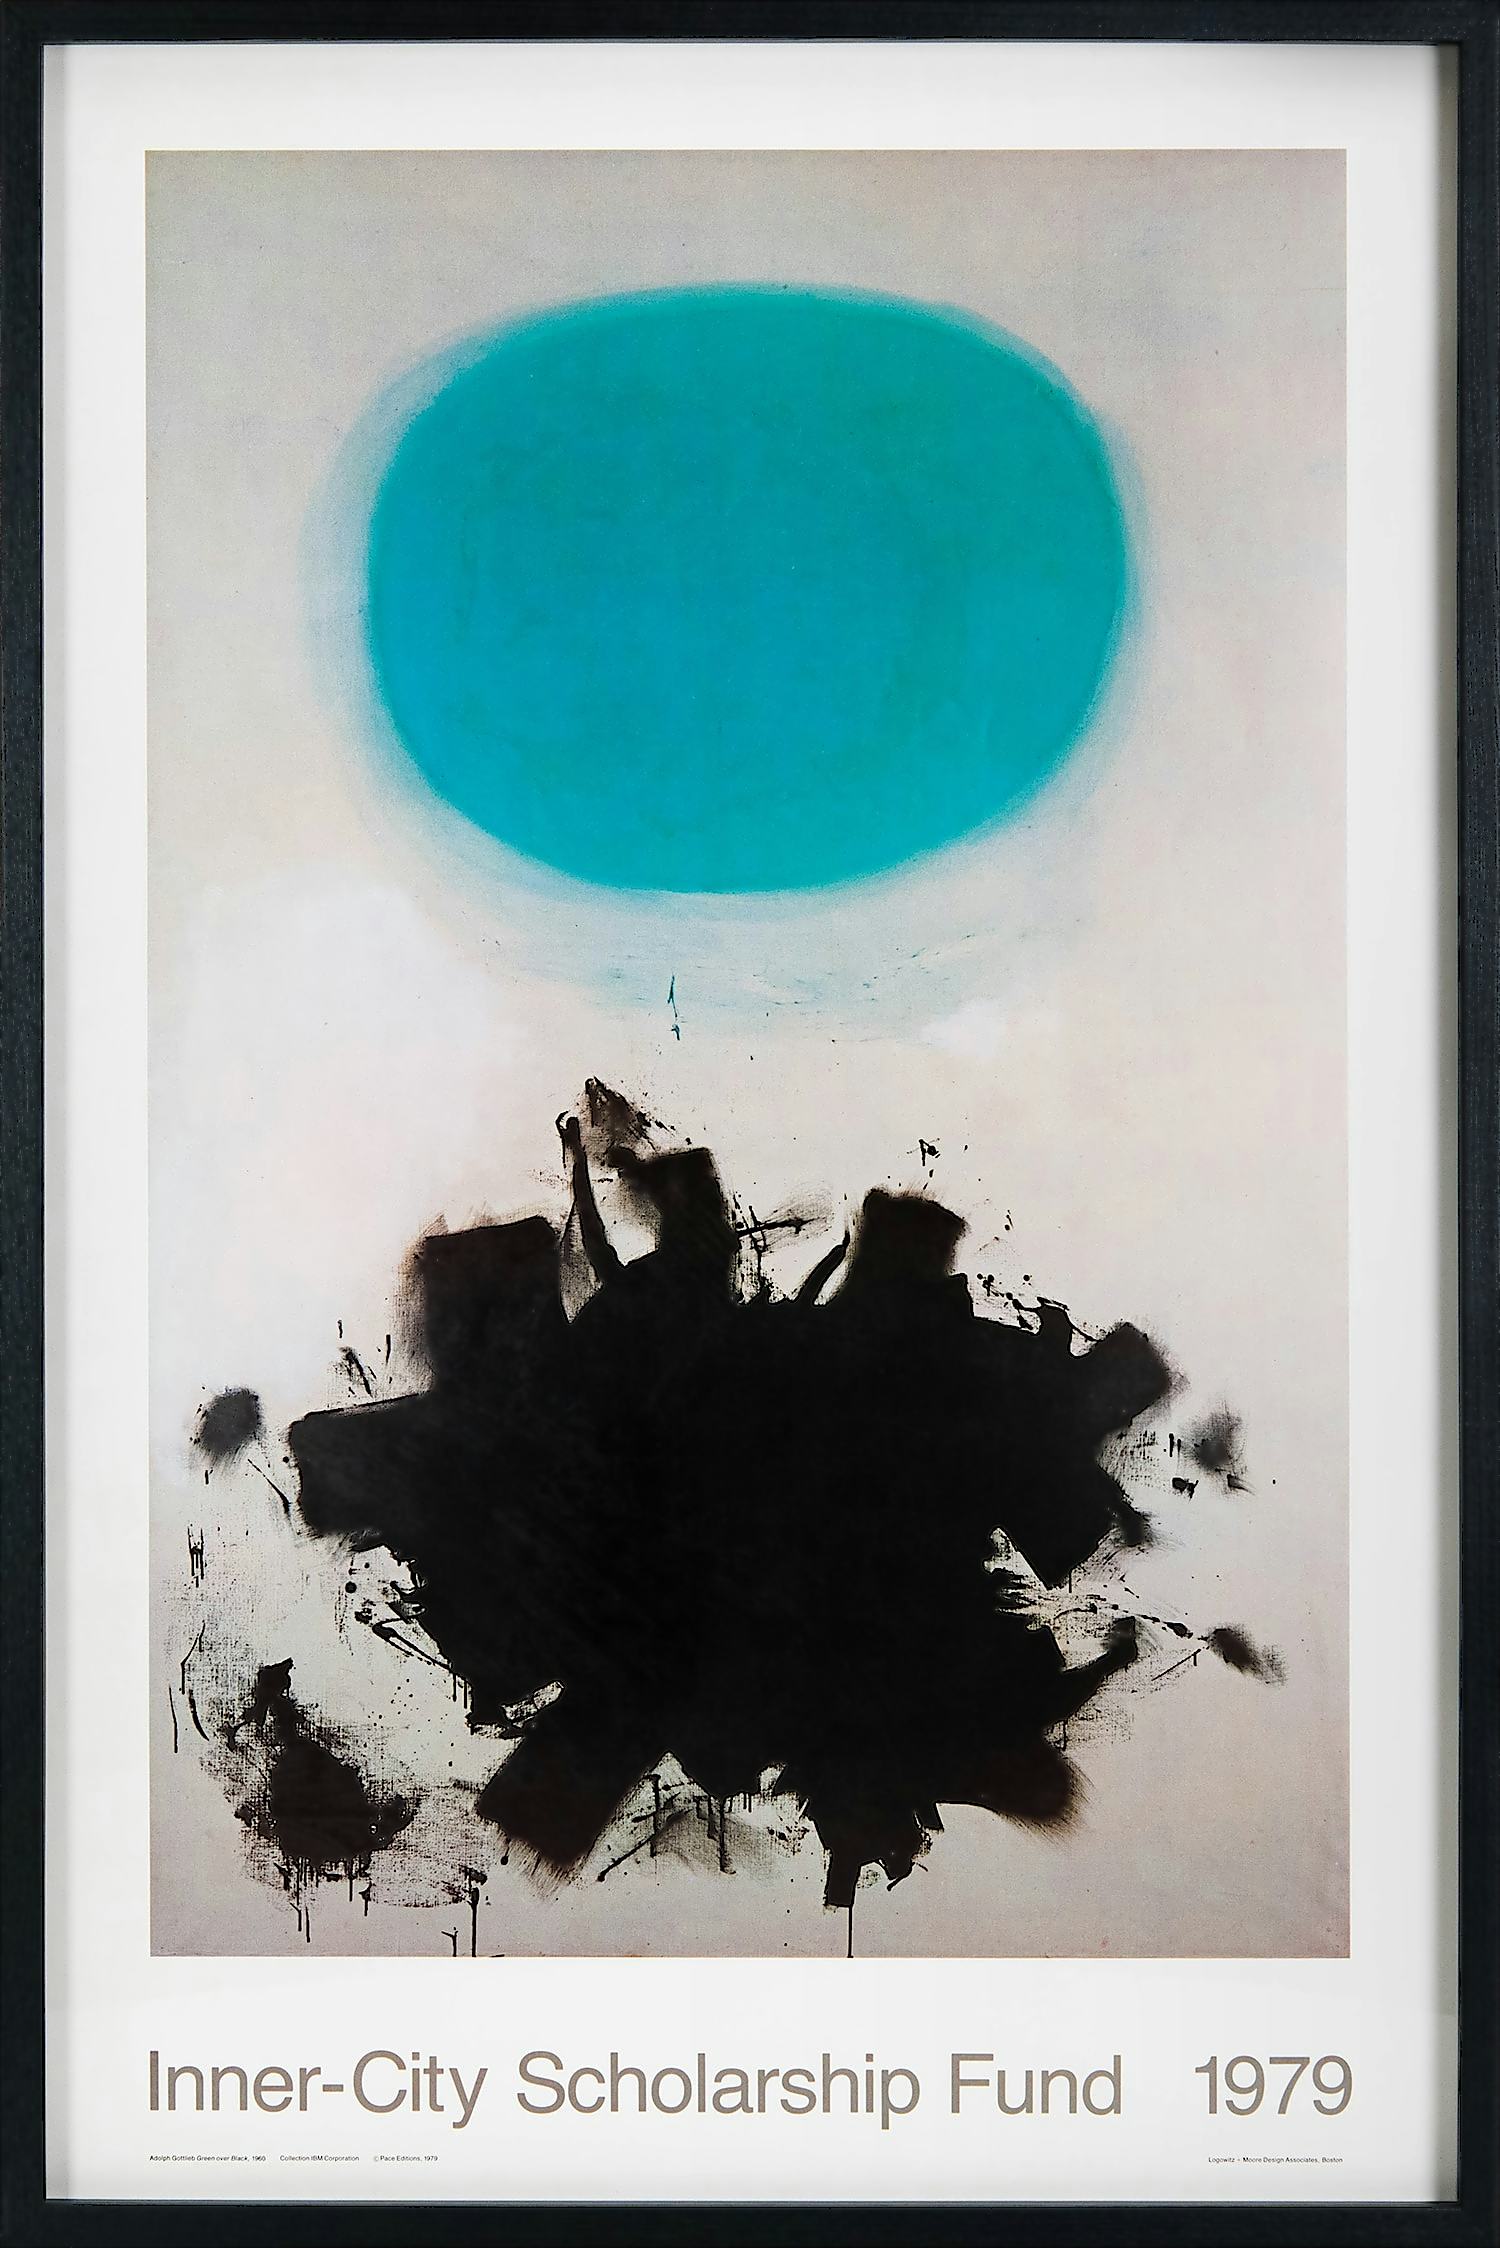 Green over Black, 1960 by Adolph Gottlieb